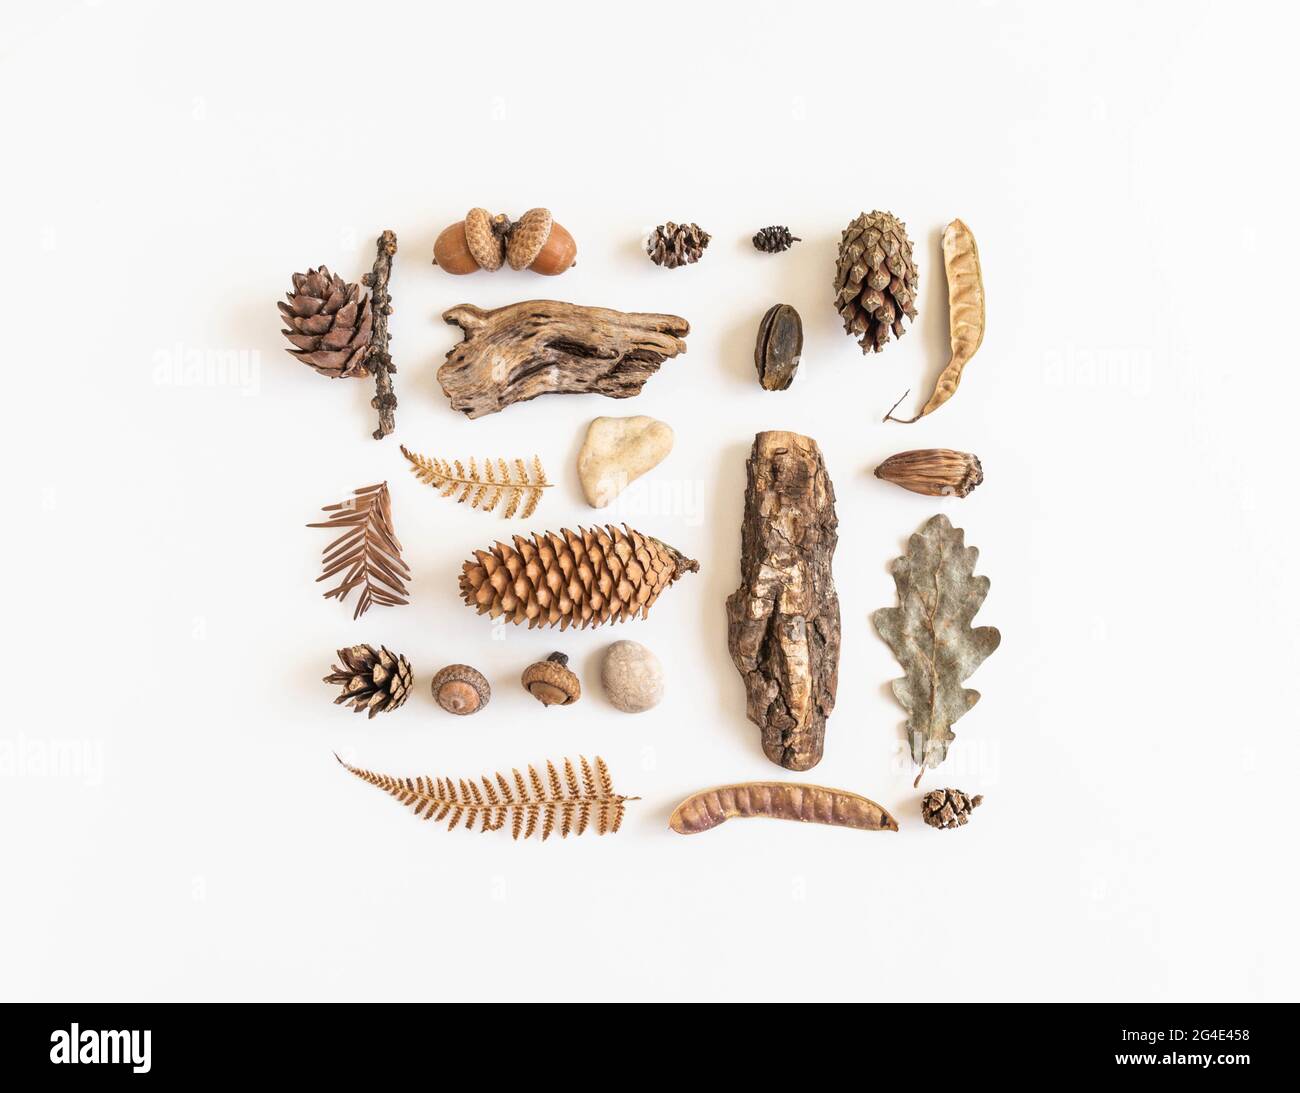 Flat lay autumn composition. Knolling made of various fall forest materials. Top view, copy space Stock Photo